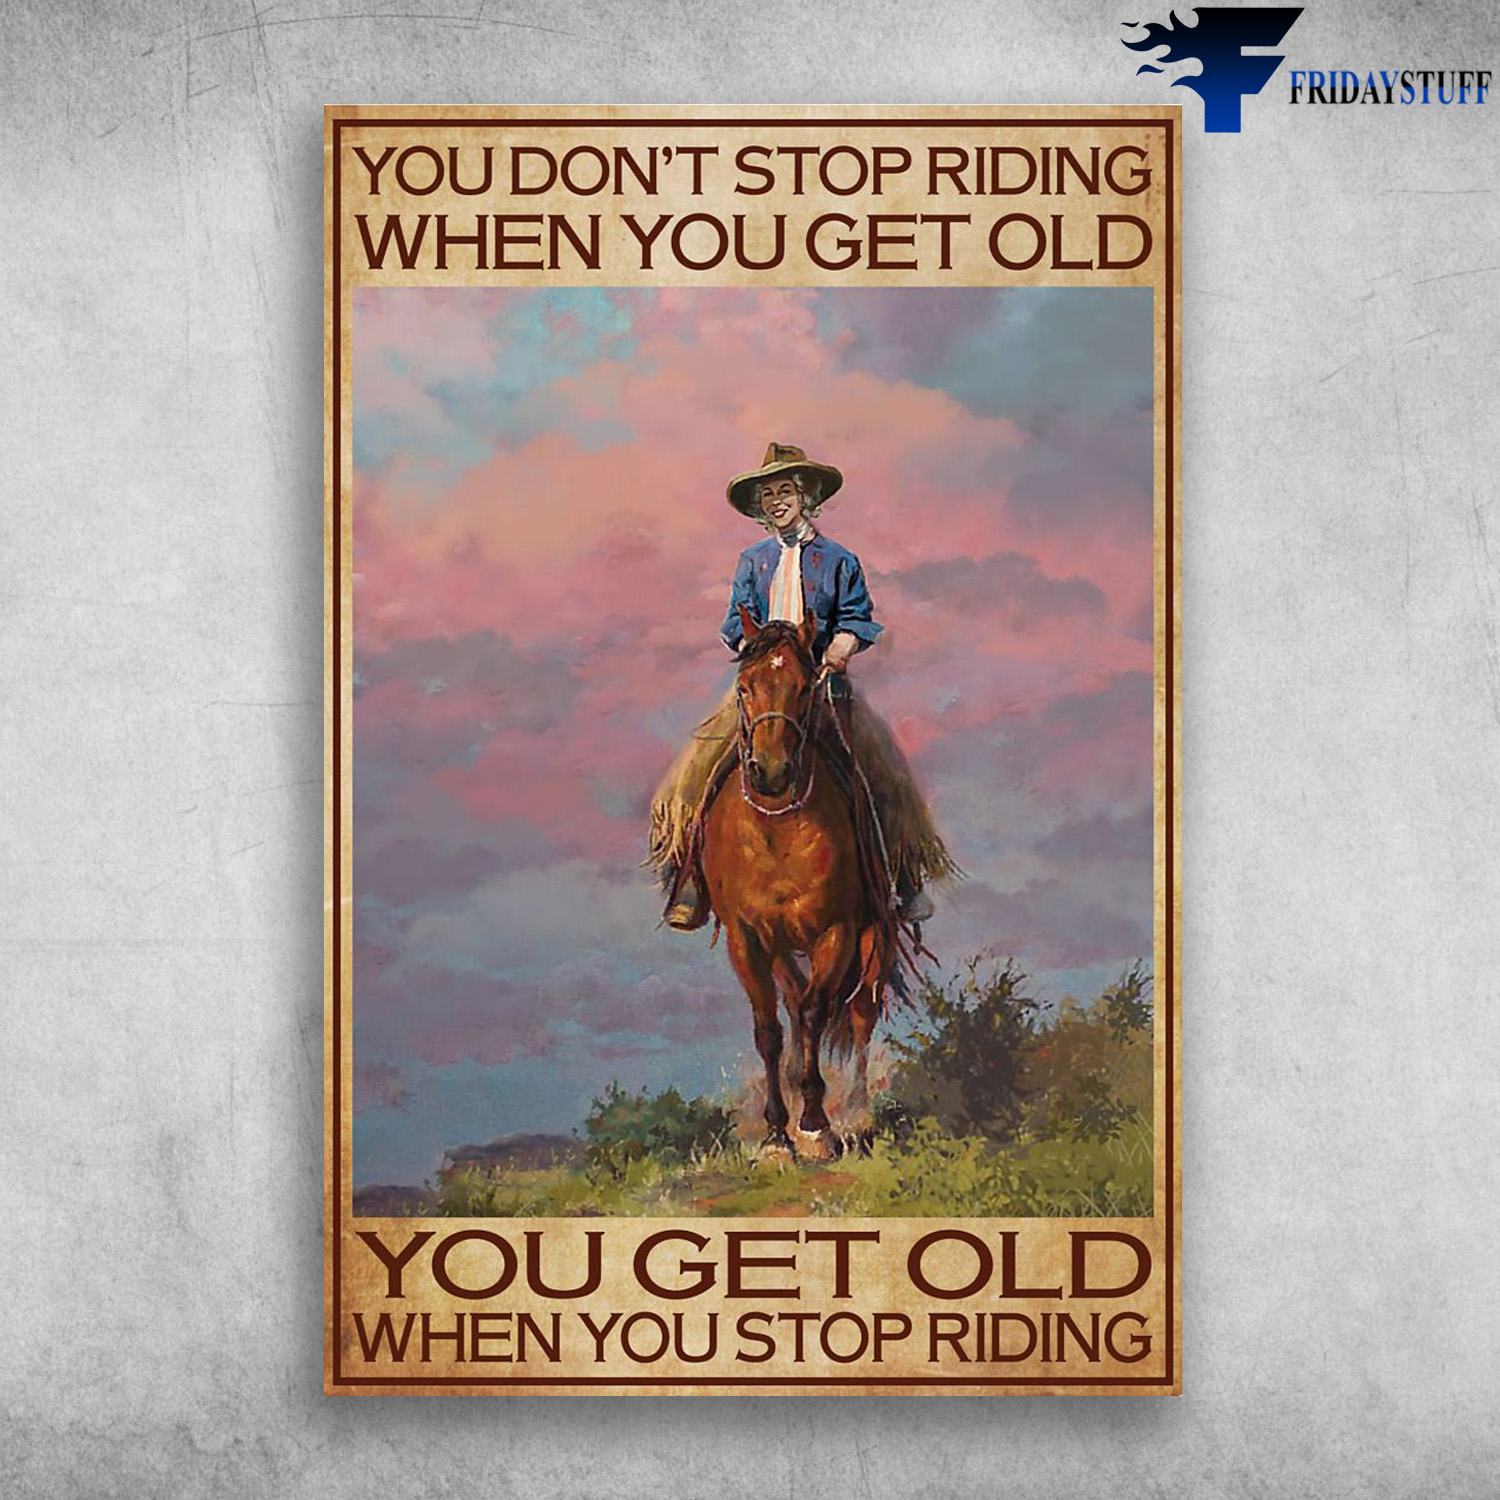 The Old Woman Riding Horse - You Don't Stop Riding When You Get Old, You Get Old When You Stop Riding